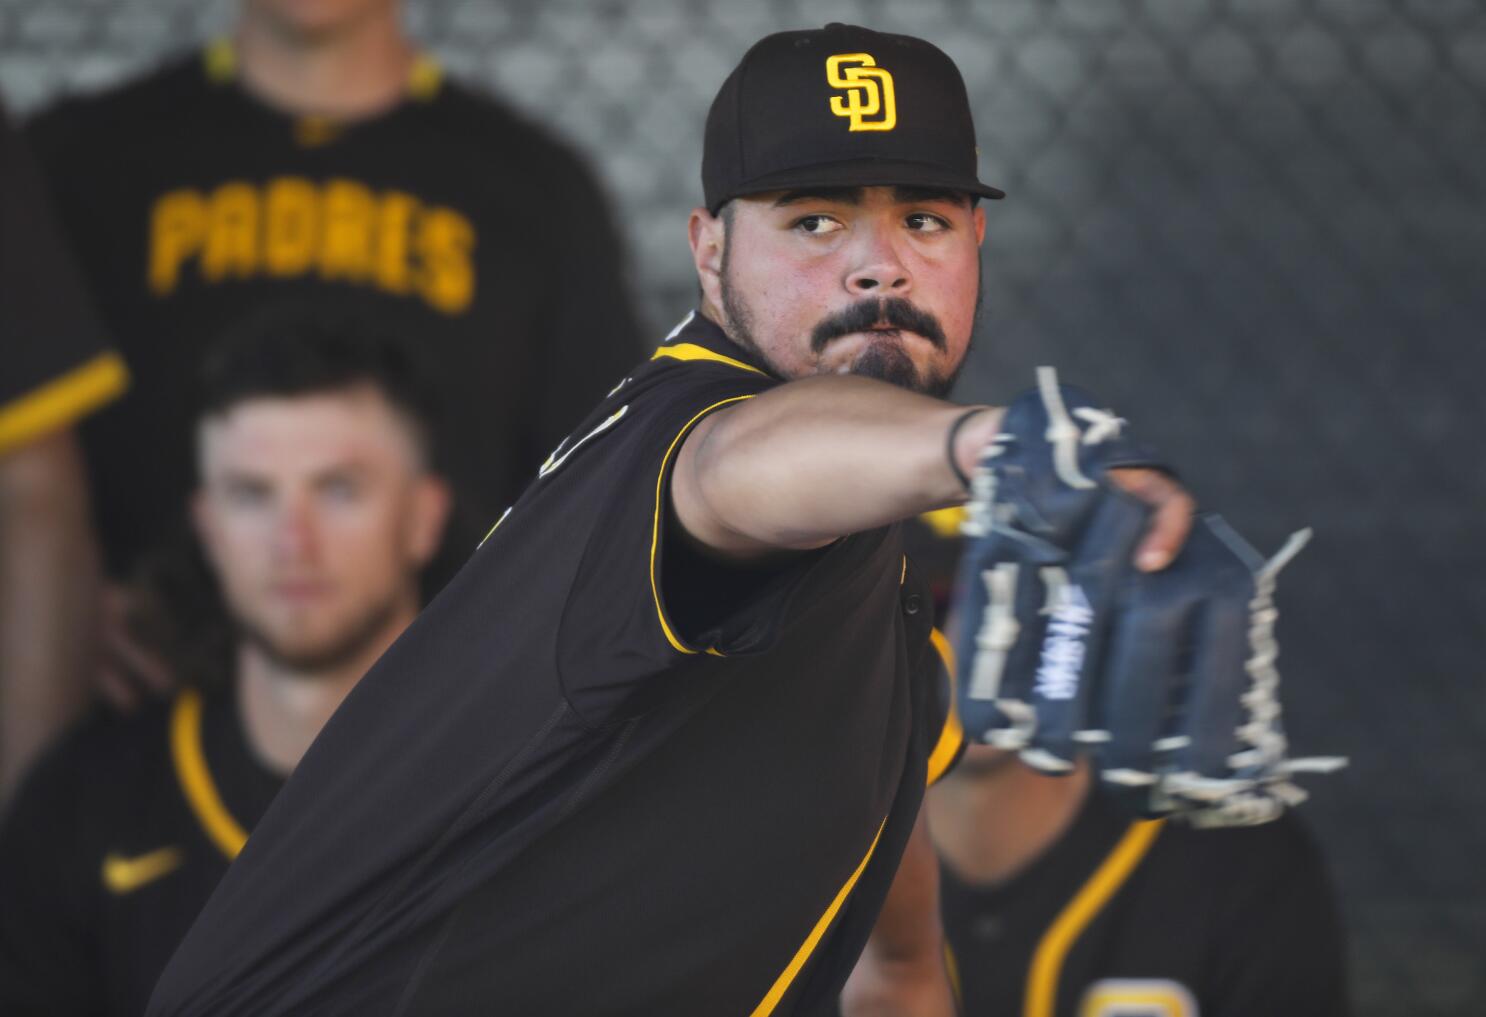 San Diego Padres: Javy Guerra in the Padres Bullpen?